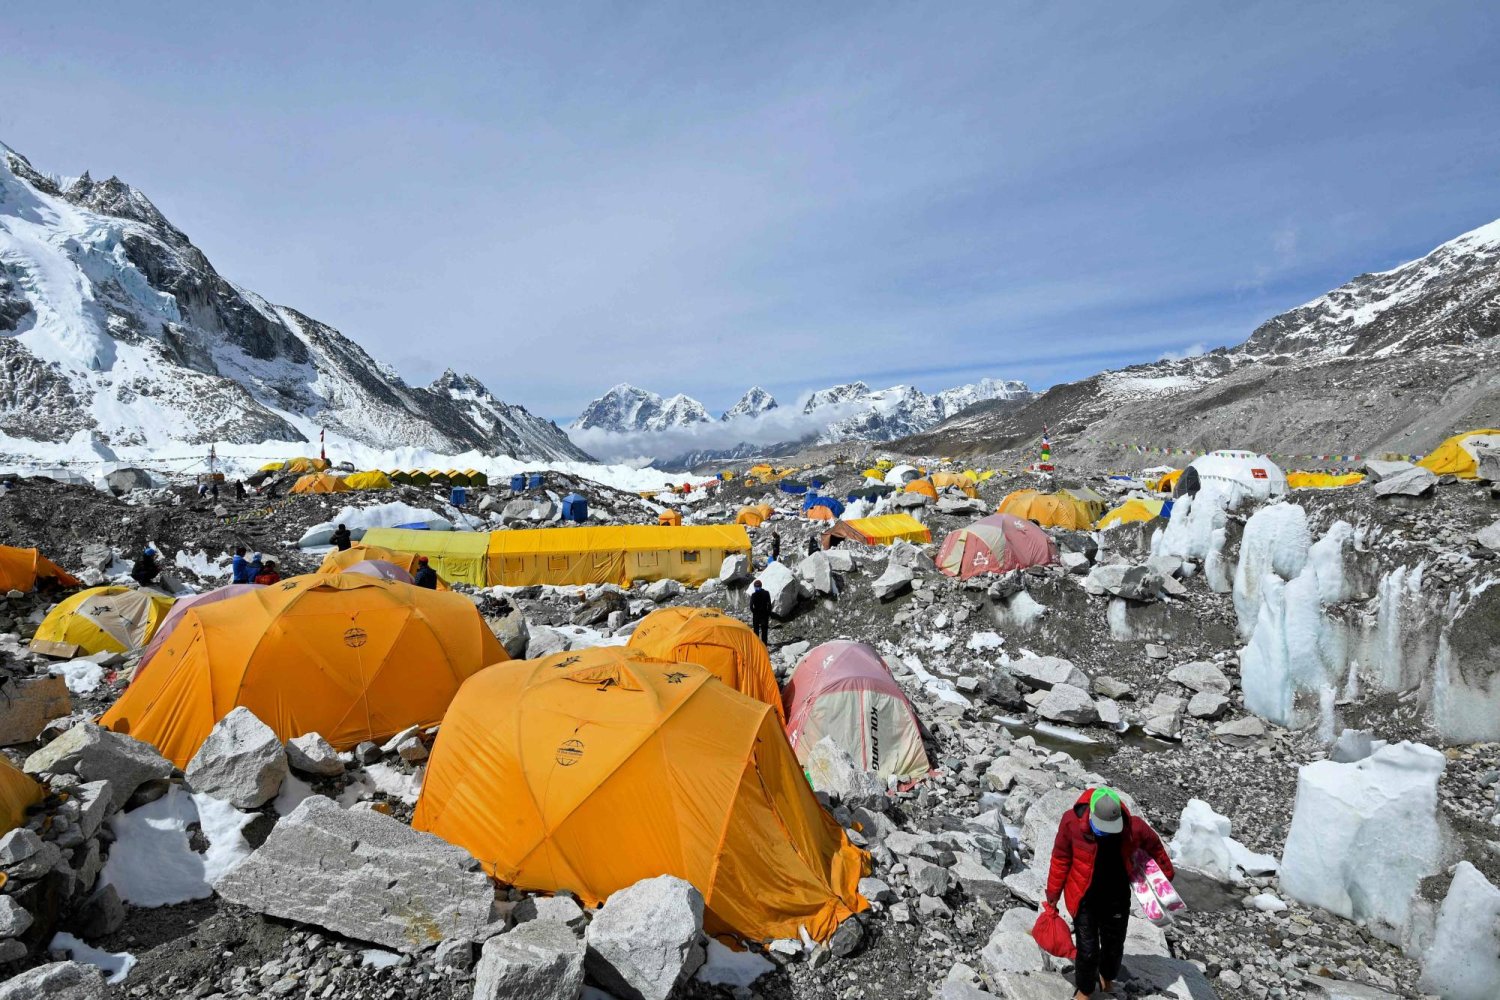 (FILES) Tents of mountaineers are pictured at the Everest base camp in the Mount Everest region of Solukhumbu district on May 3, 2021. (Photo by Prakash MATHEMA / AFP)